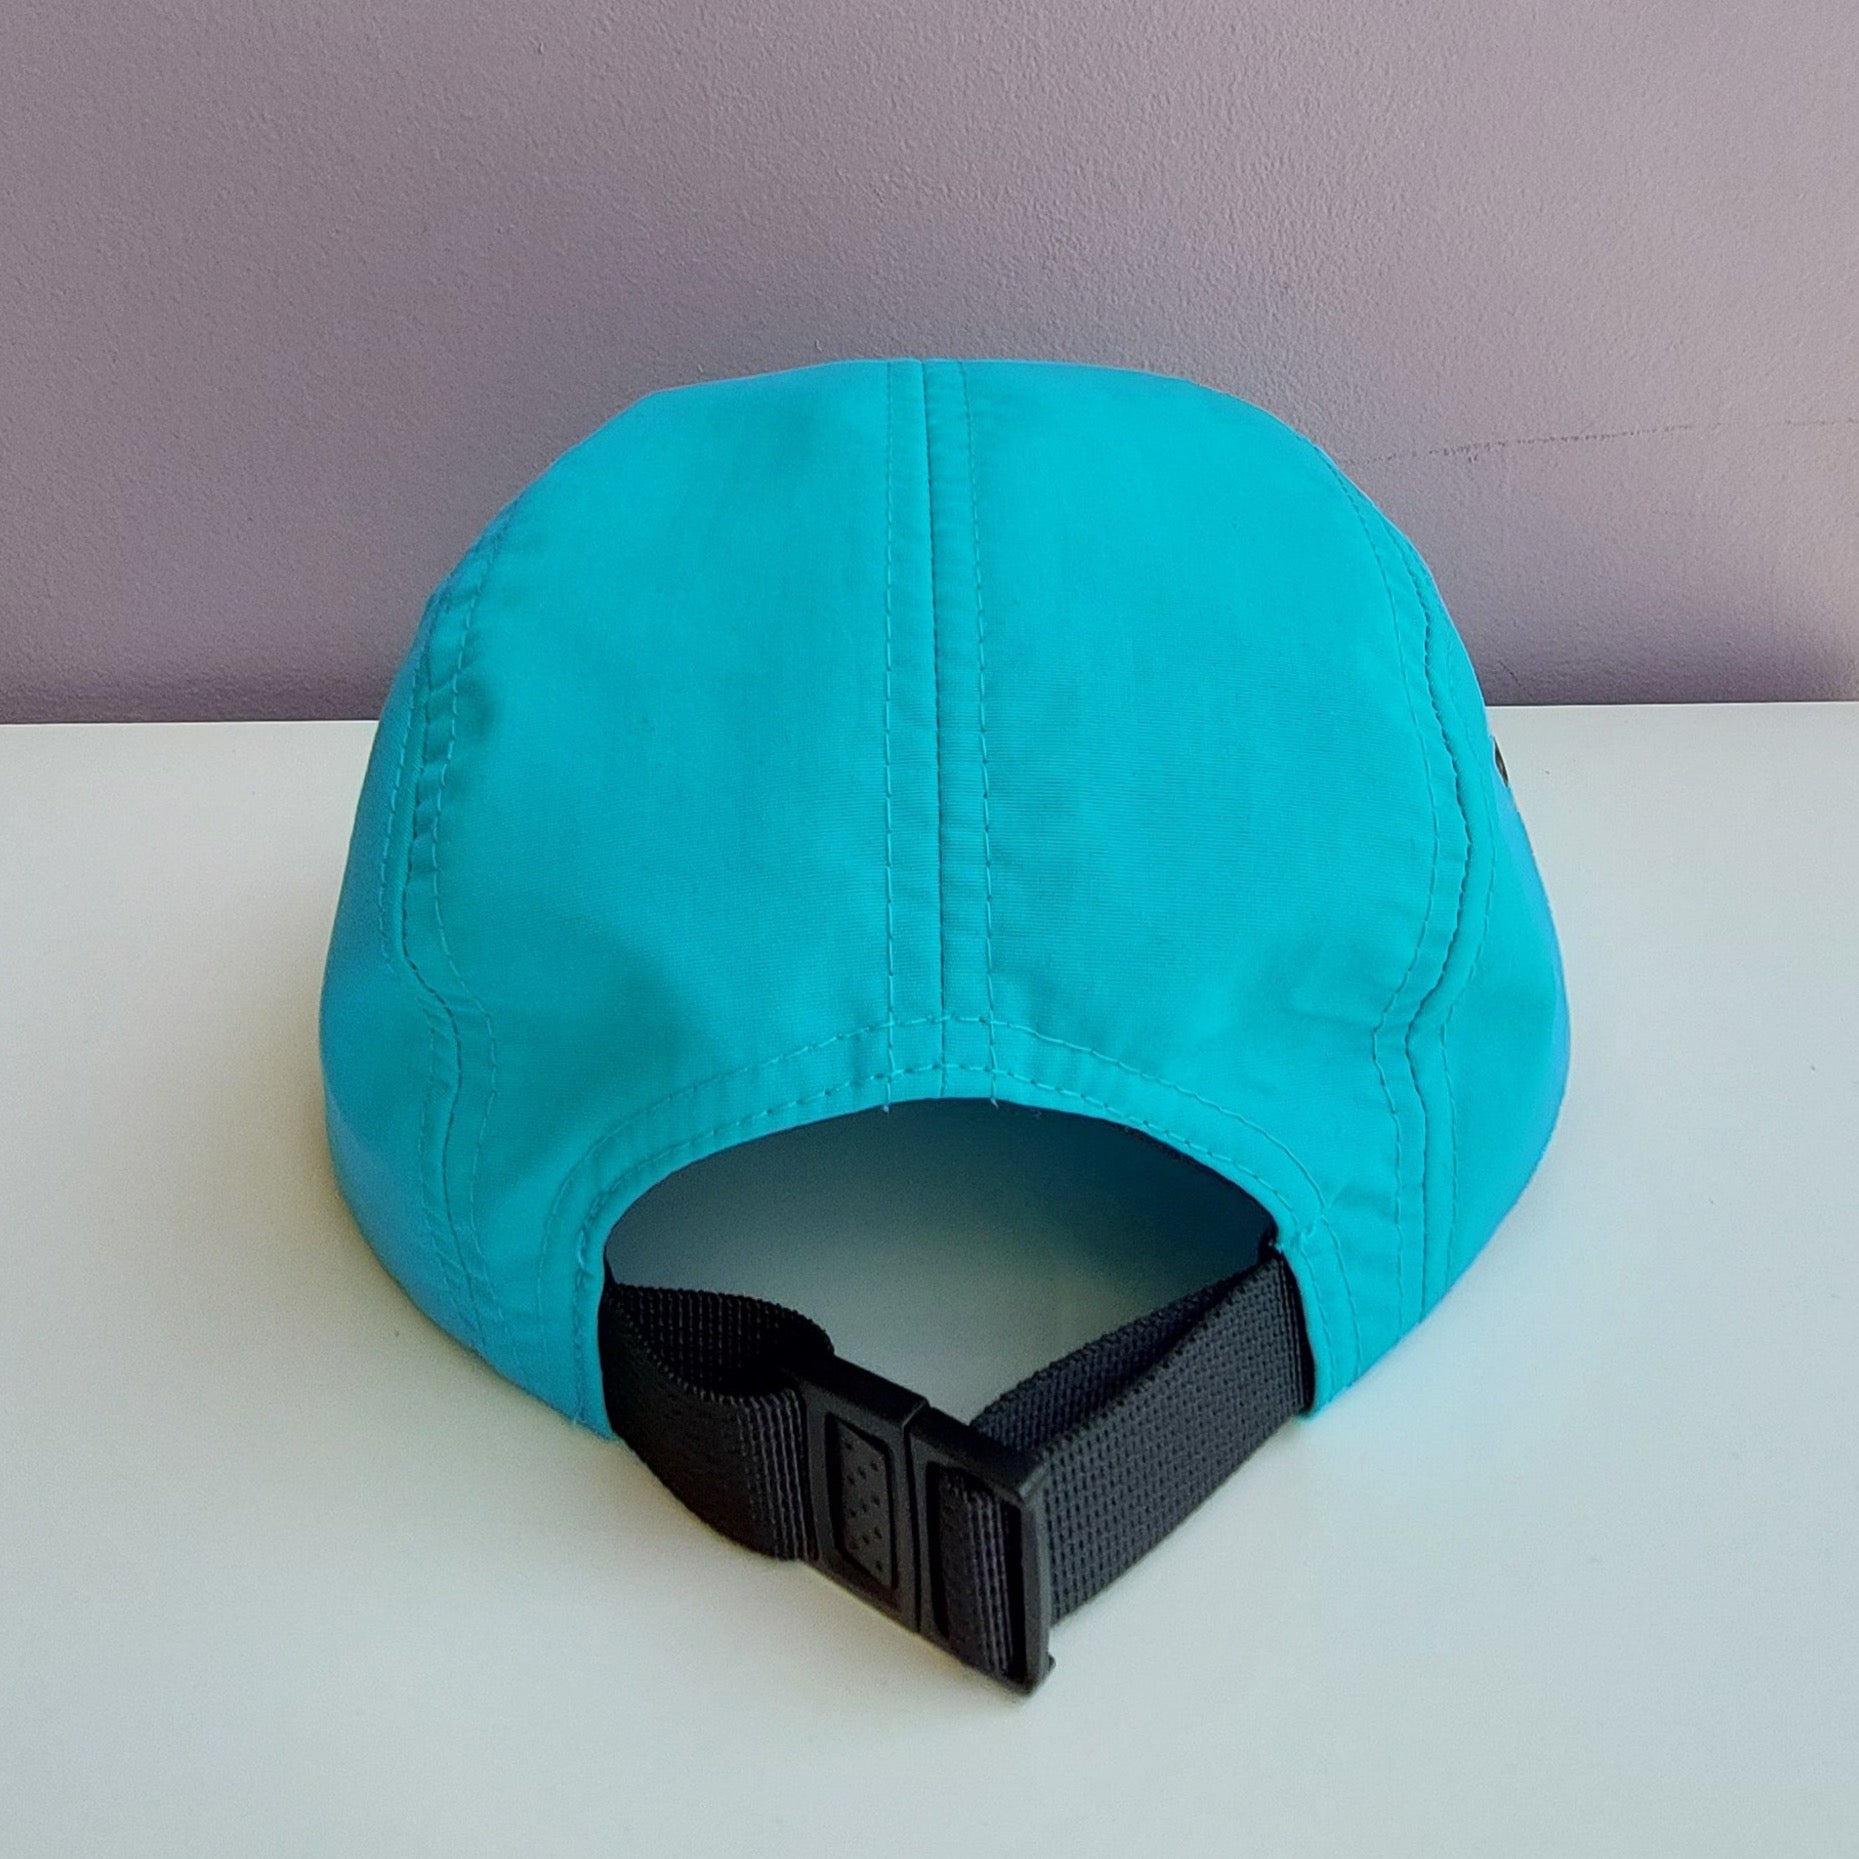 A back view of a bright blue 5 panel cap with a black adjustable strap sitting on a white surface with a light purple background.